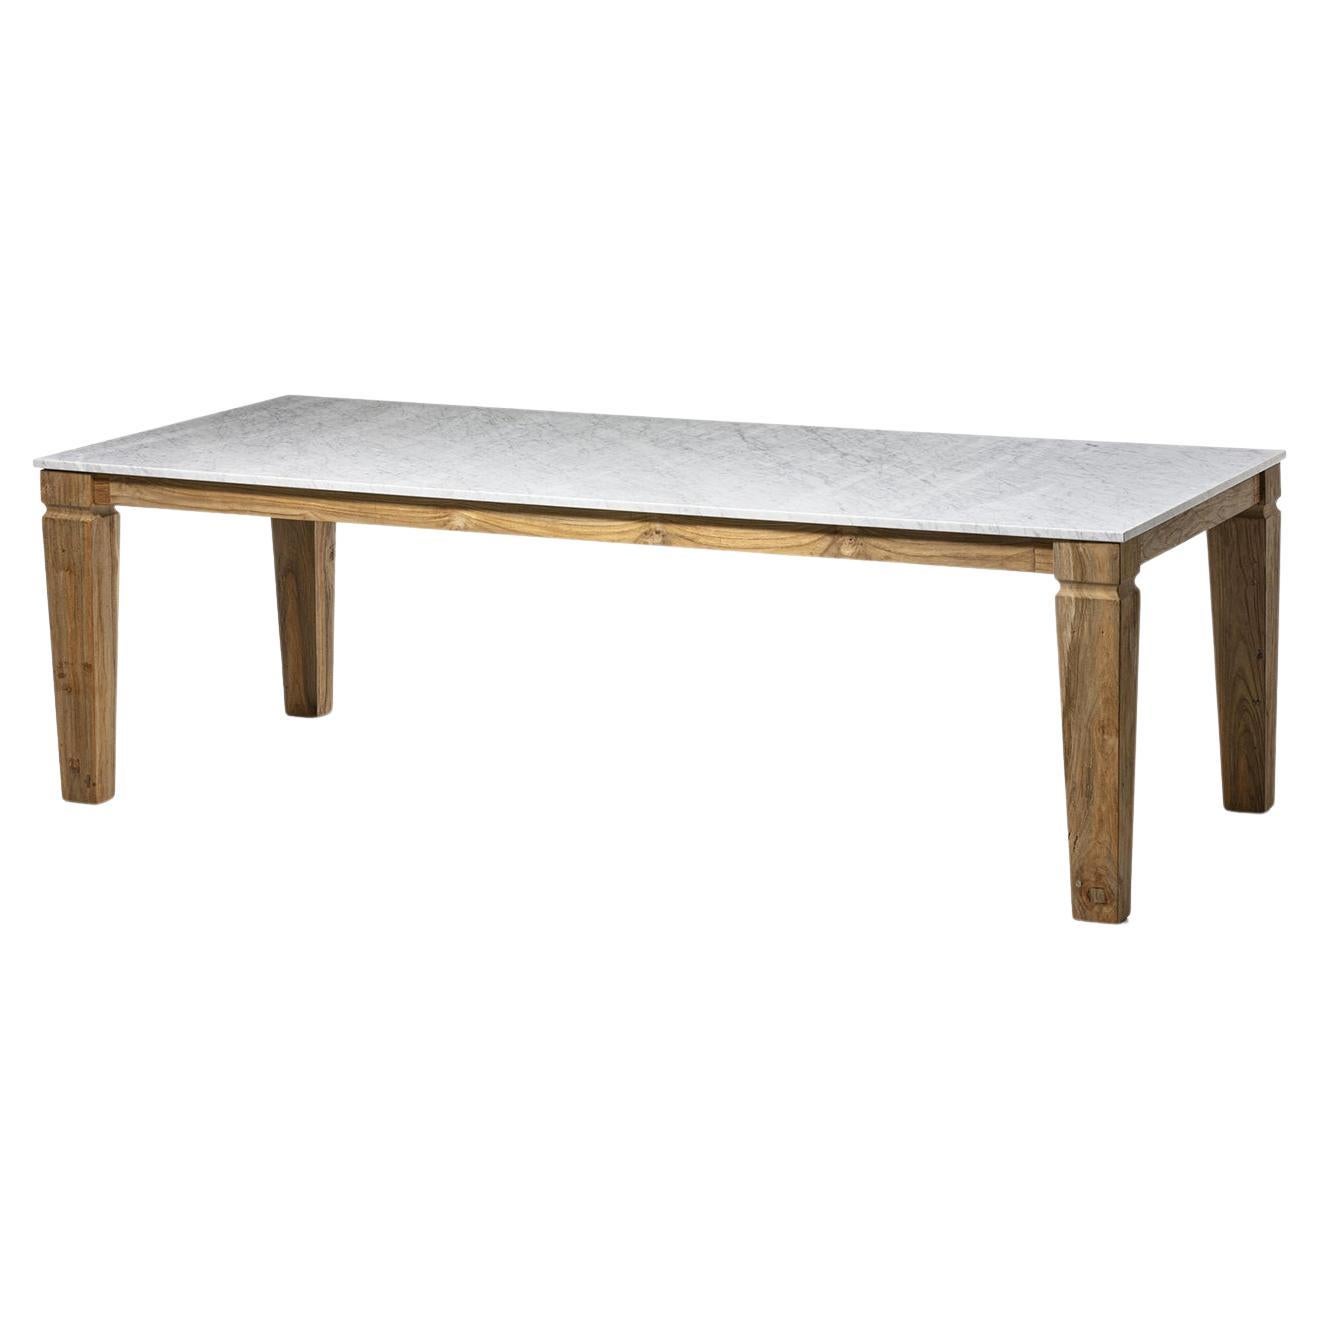 Barletta Dining Table For Sale